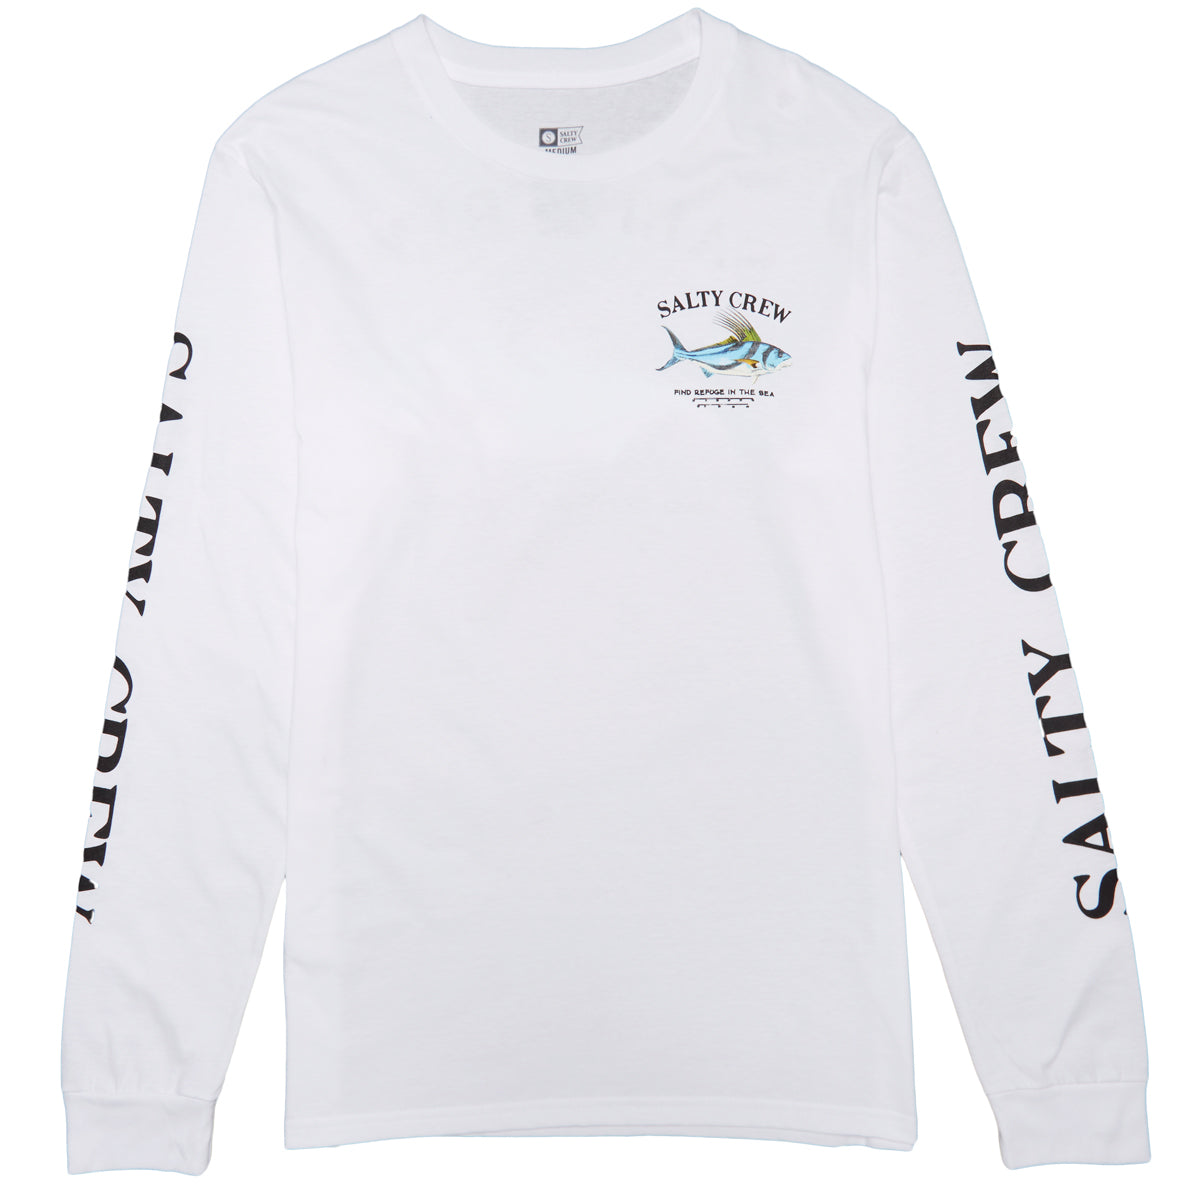 Salty Crew Rooster Premium Long Sleeve T-Shirt - White image 2